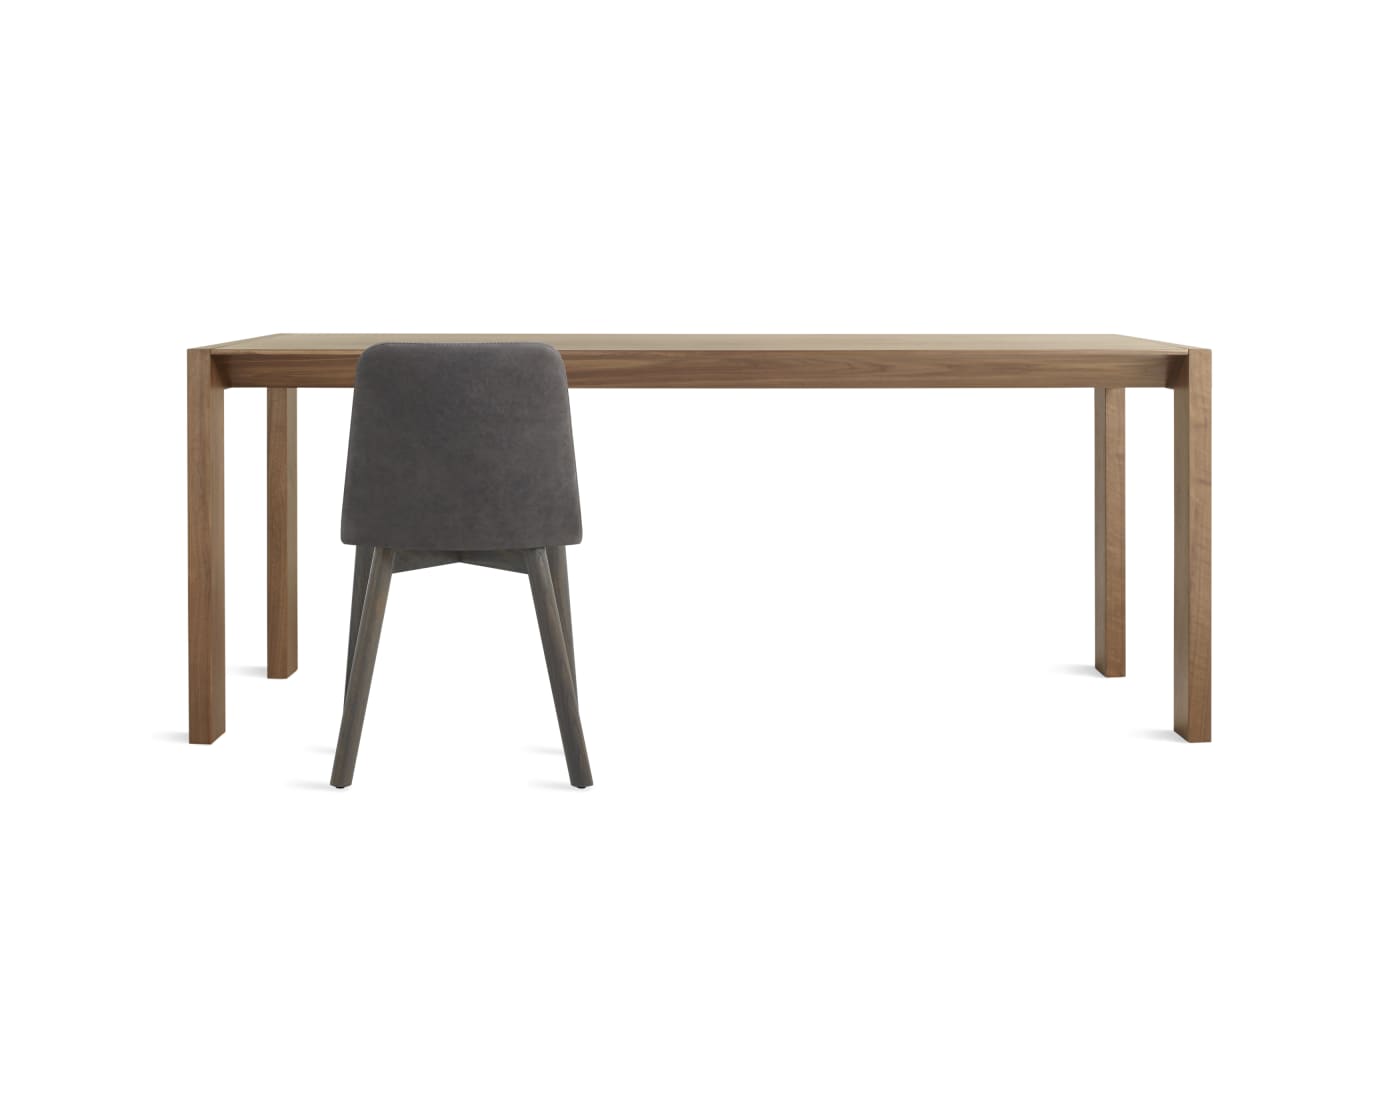 Second Best Wood Dining Table